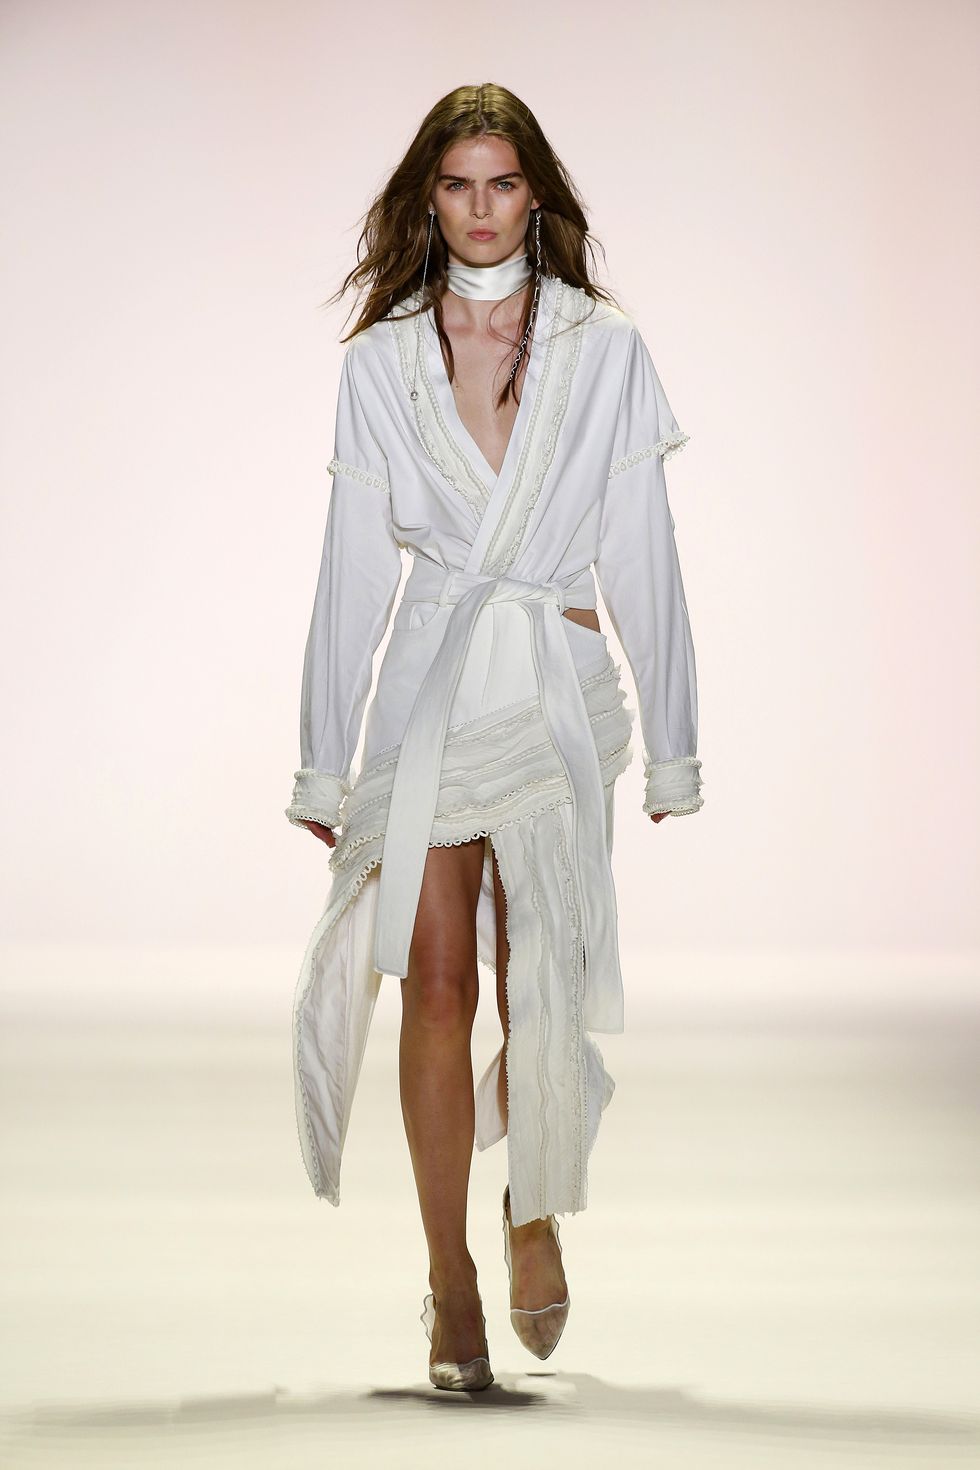 <p>We've seen PJ sets&nbsp;and camisoles&nbsp;make there way into daytime use, but now it's time to move on to another sleepwear-as-evening-wear item. At Jonathan Simkhai, the robe was the new silk shirt. Invest in a fancy&nbsp;<a href="http://oliviavonhalle.com/us/shop/robes-and-kimonos/capability-soumaya-full-length-silk-robe.html" data-tracking-id="recirc-text-link" target="_blank">robe</a>&nbsp;and use it as a posh&nbsp;<a href="http://www.elle.com/fashion/shopping/g28982/womens-evening-coats-and-jackets/" data-tracking-id="recirc-text-link" target="_blank">evening coat</a>&nbsp;.&nbsp;  <span class="redactor-invisible-space" data-verified="redactor" data-redactor-tag="span" data-redactor-class="redactor-invisible-space"></span></p>